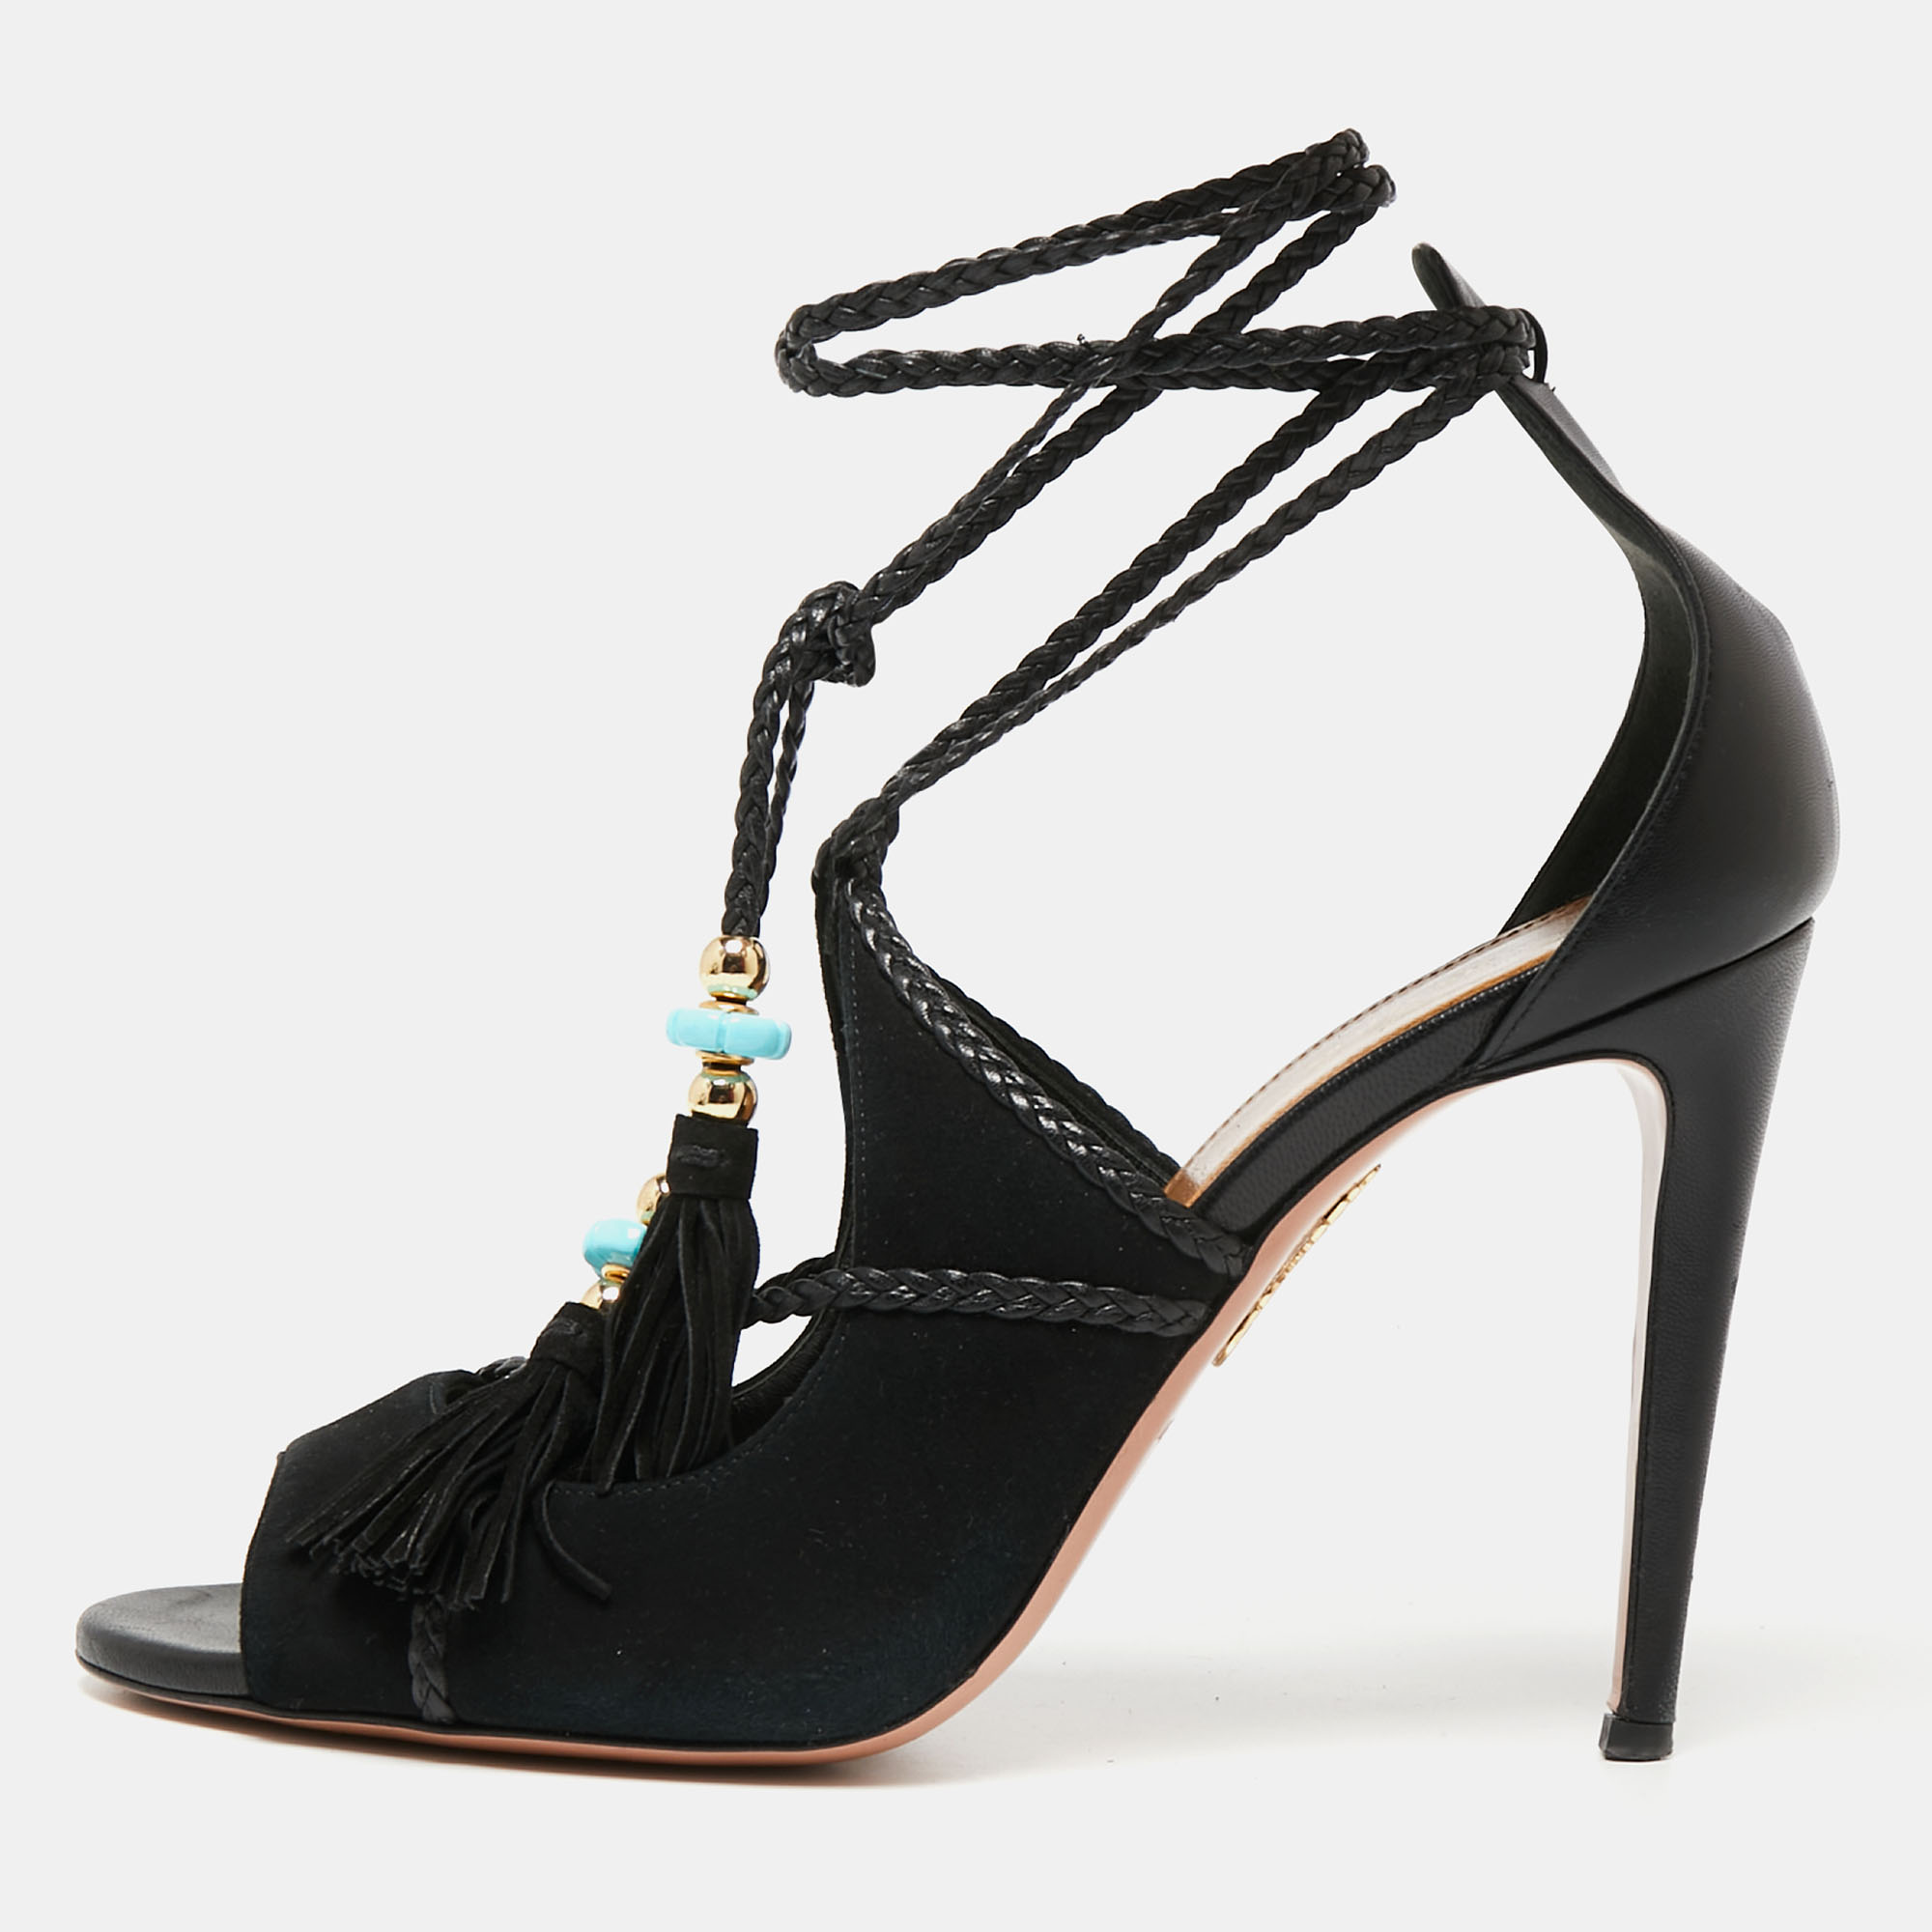 Aquazzura  Black Suede And Leather Open Toe Ankle Wrap  Sandals Size 41